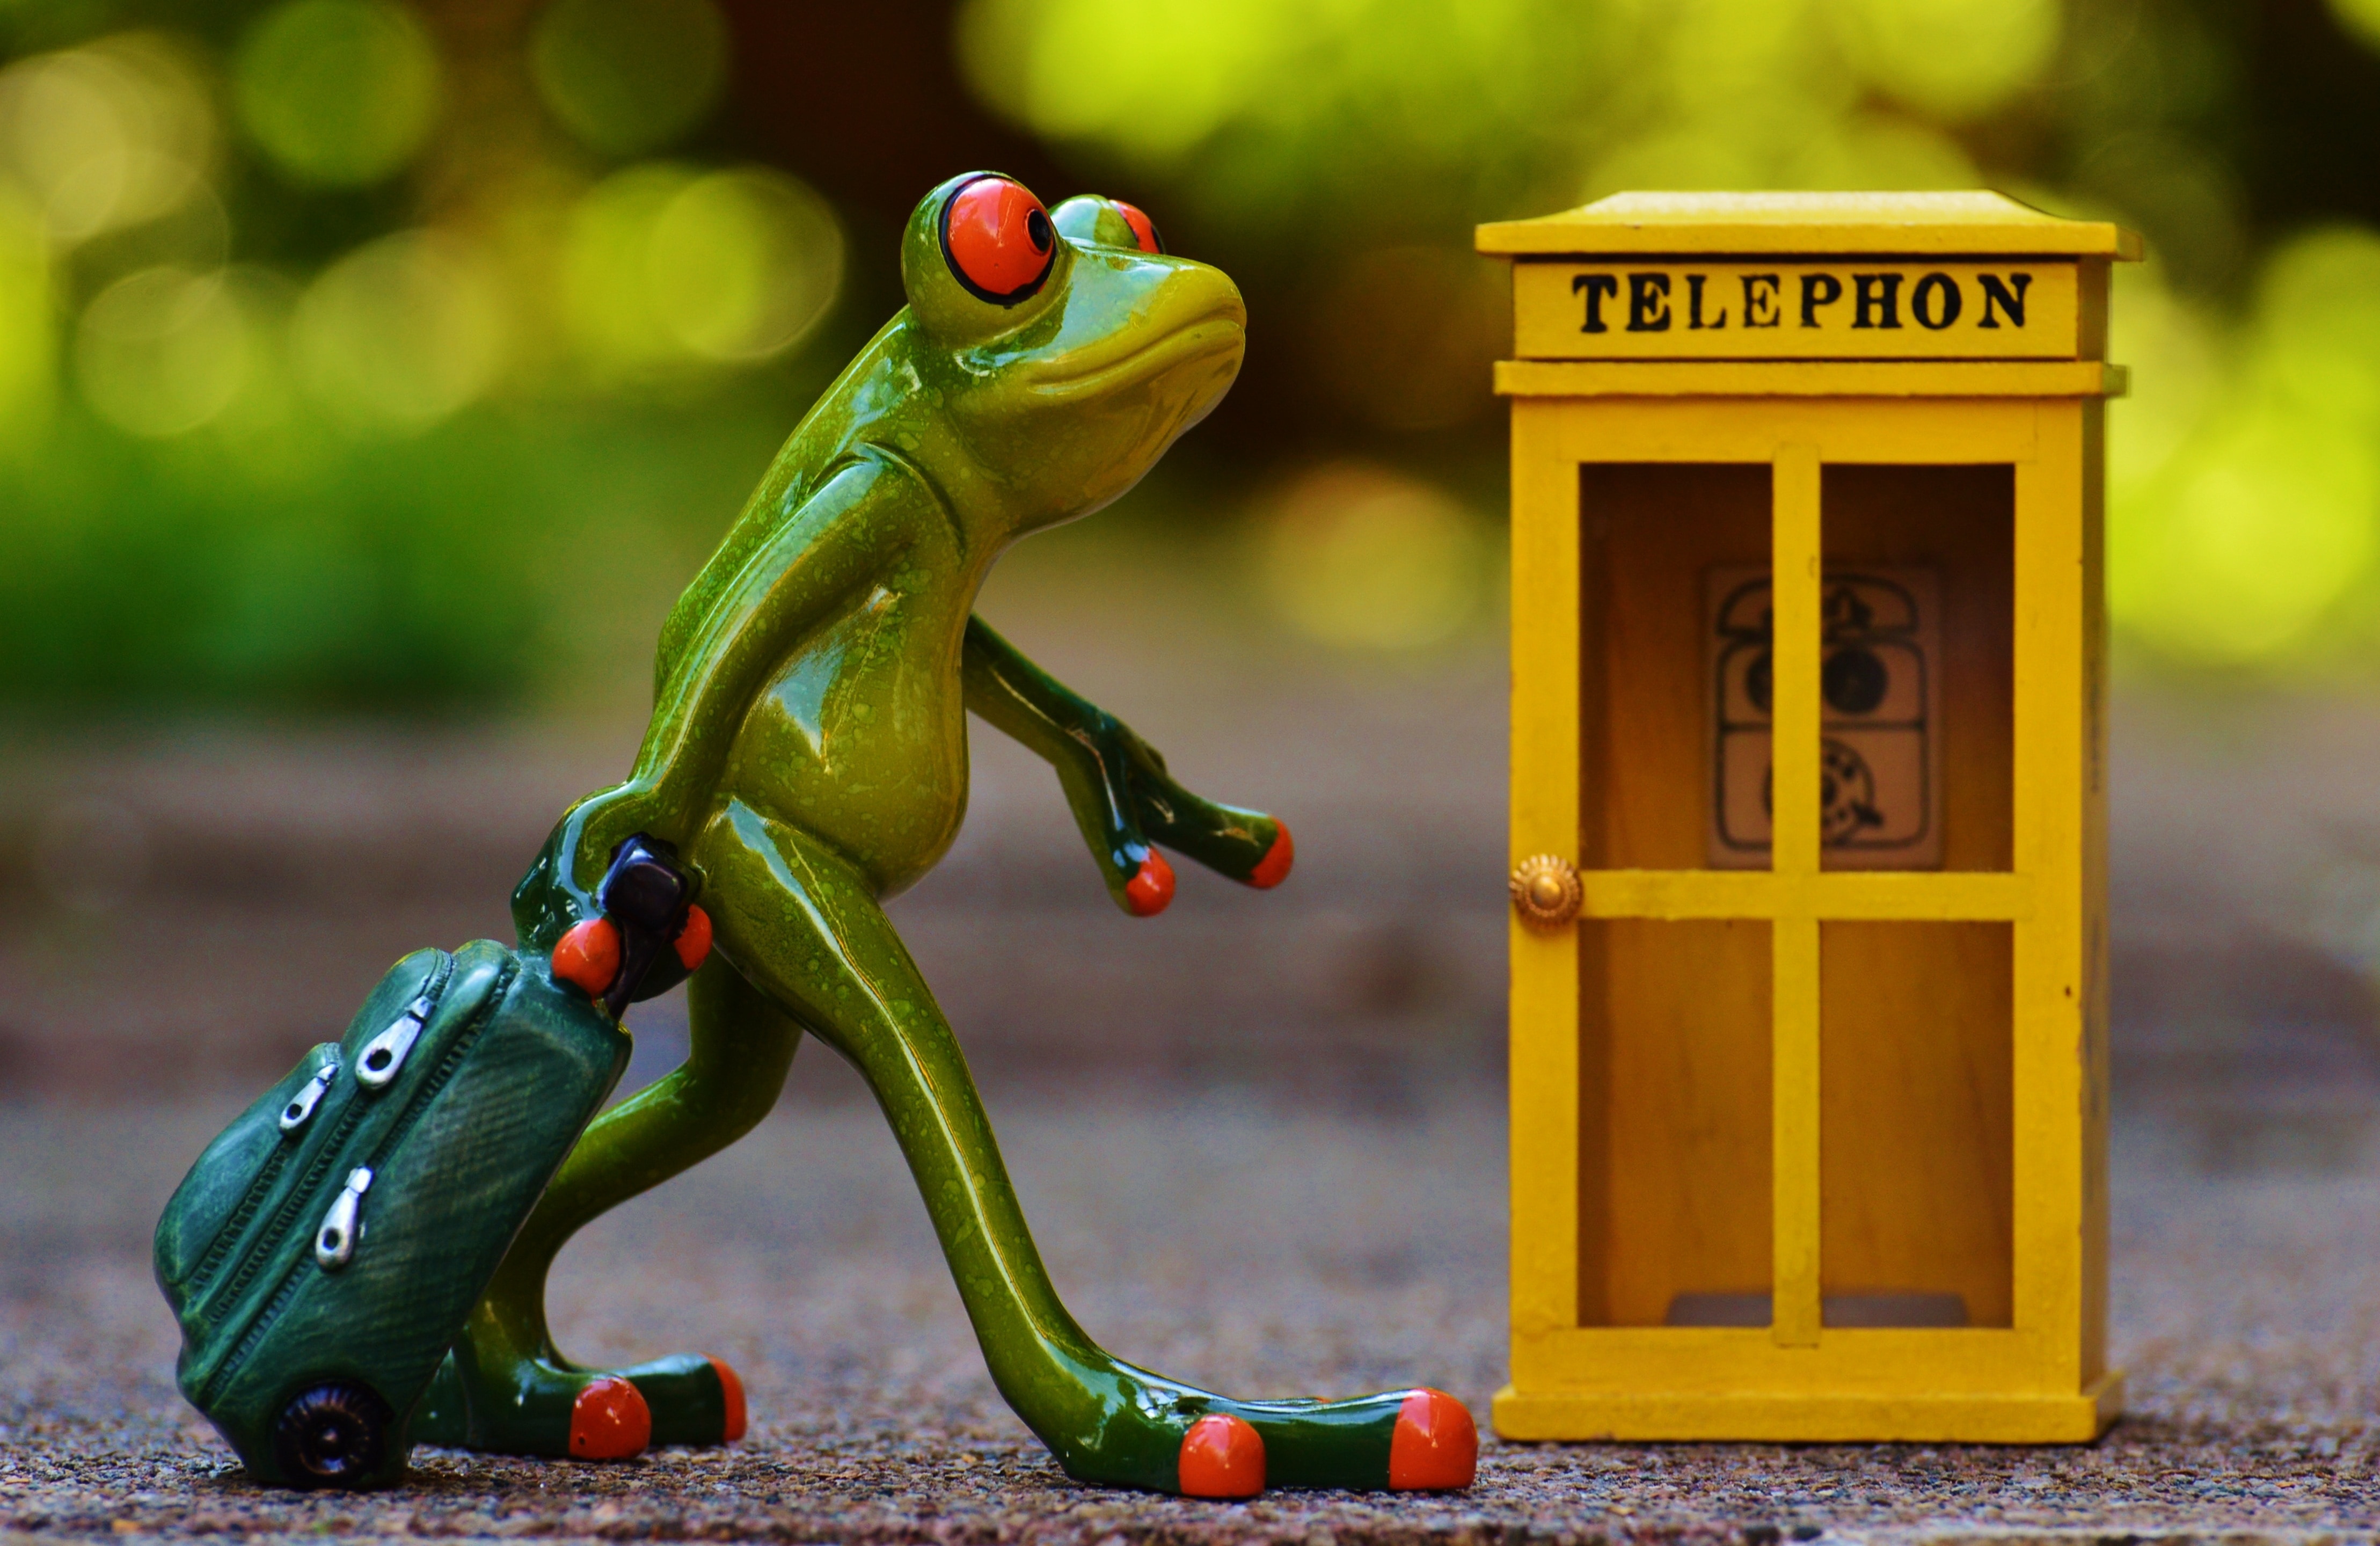 depth of field painting of frog and miniature telephon boot